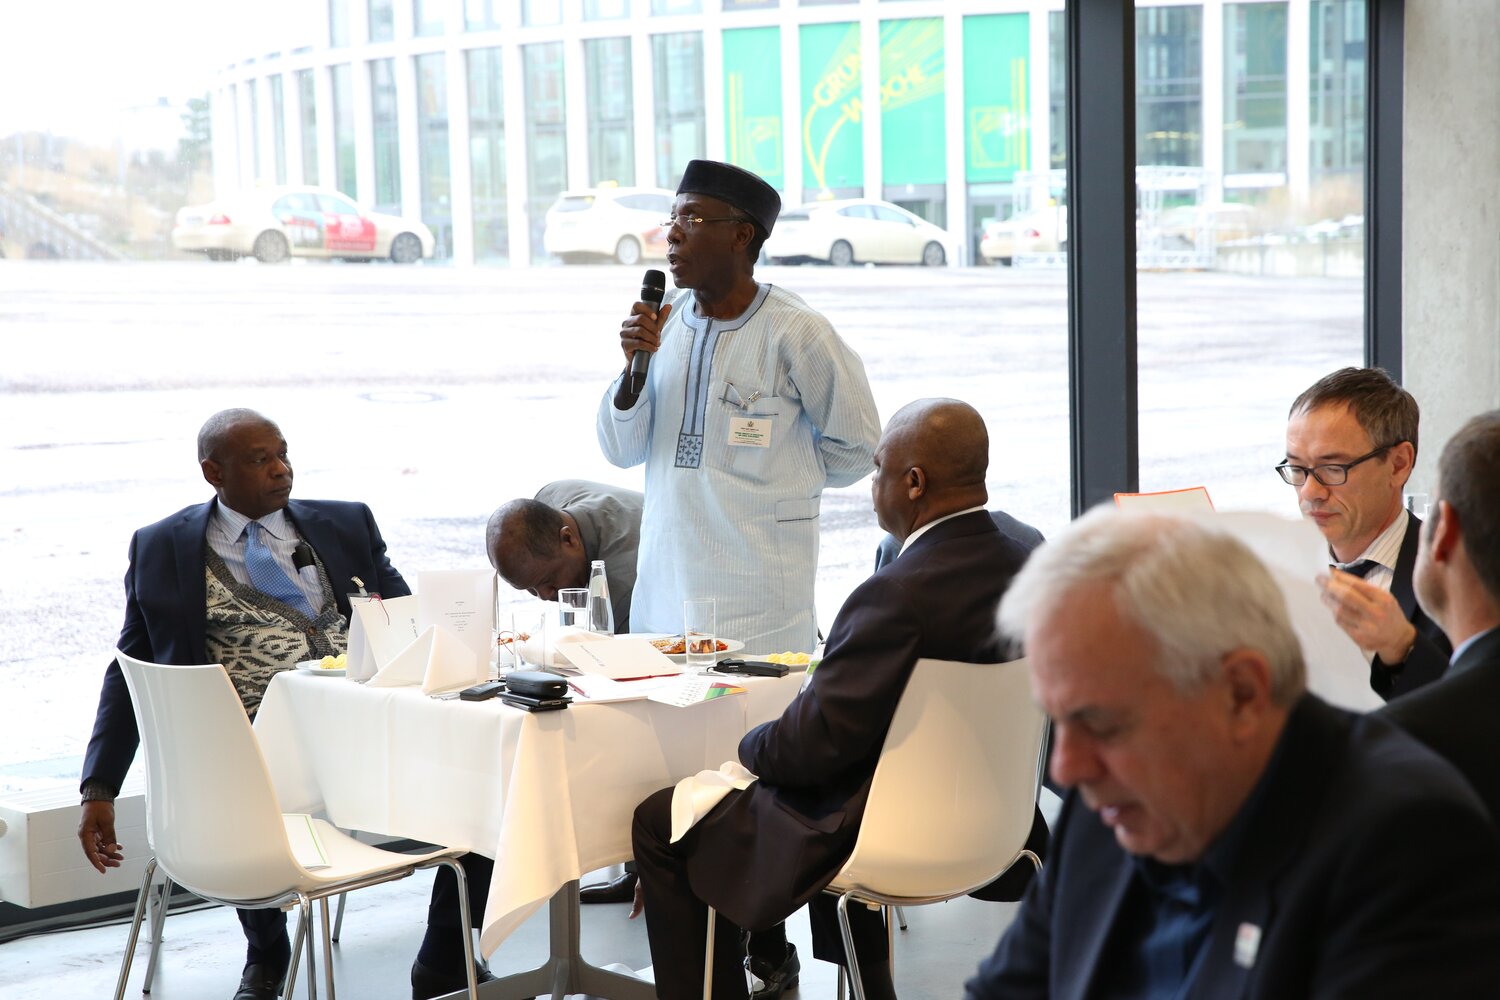 H.E. Minister Audu Obge, Ministry of Agriculture and Rural Development in Nigeria, asks about the benefit of crop diversity to small farmers 